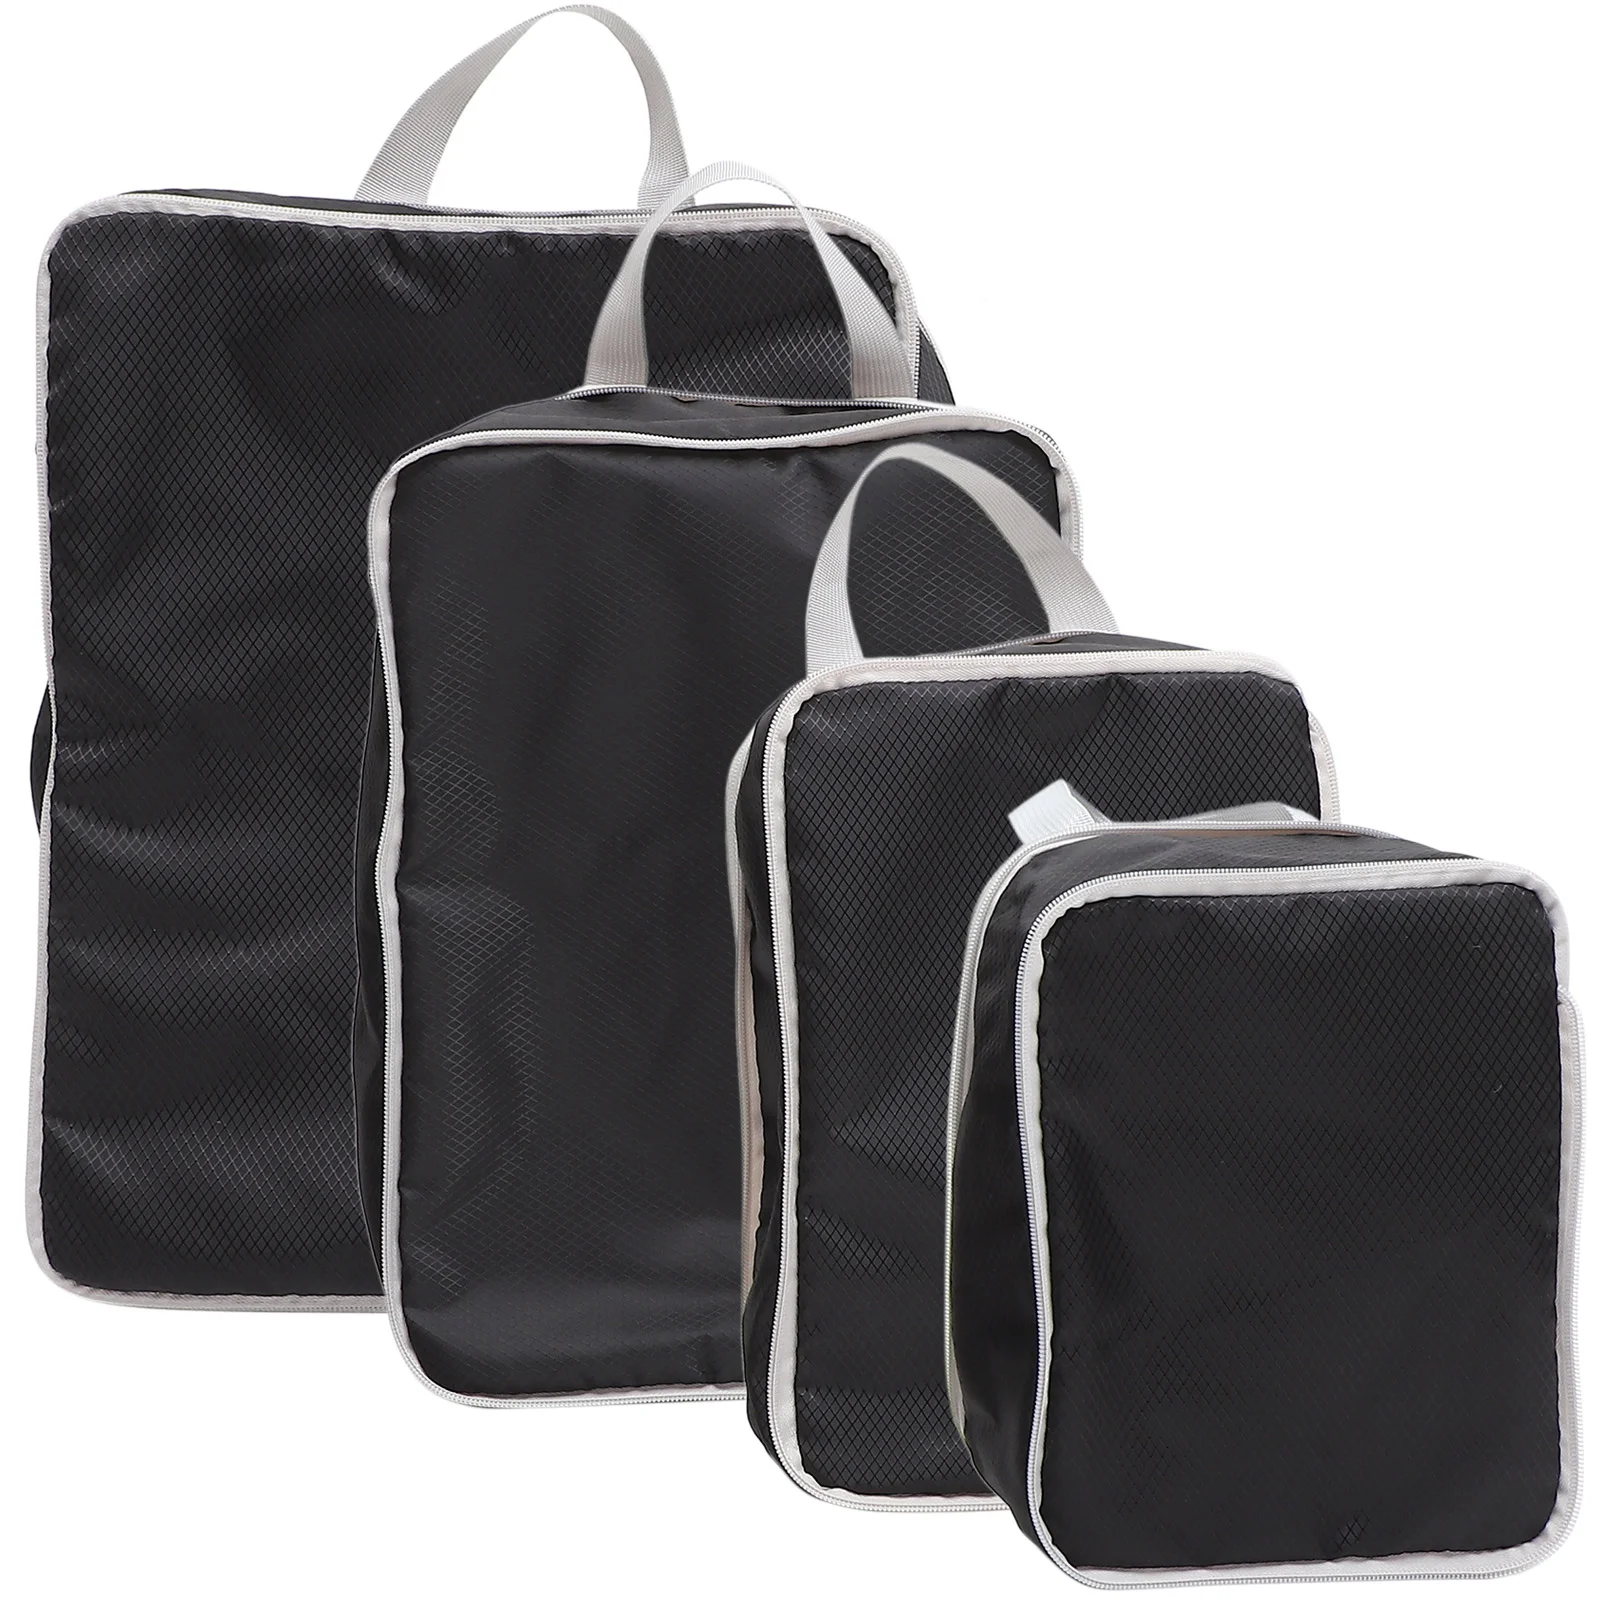 

4 Pcs Compression Packing Cubes for Travel Compact Bags Suitcases Storage Hanging Diaper Extra Large